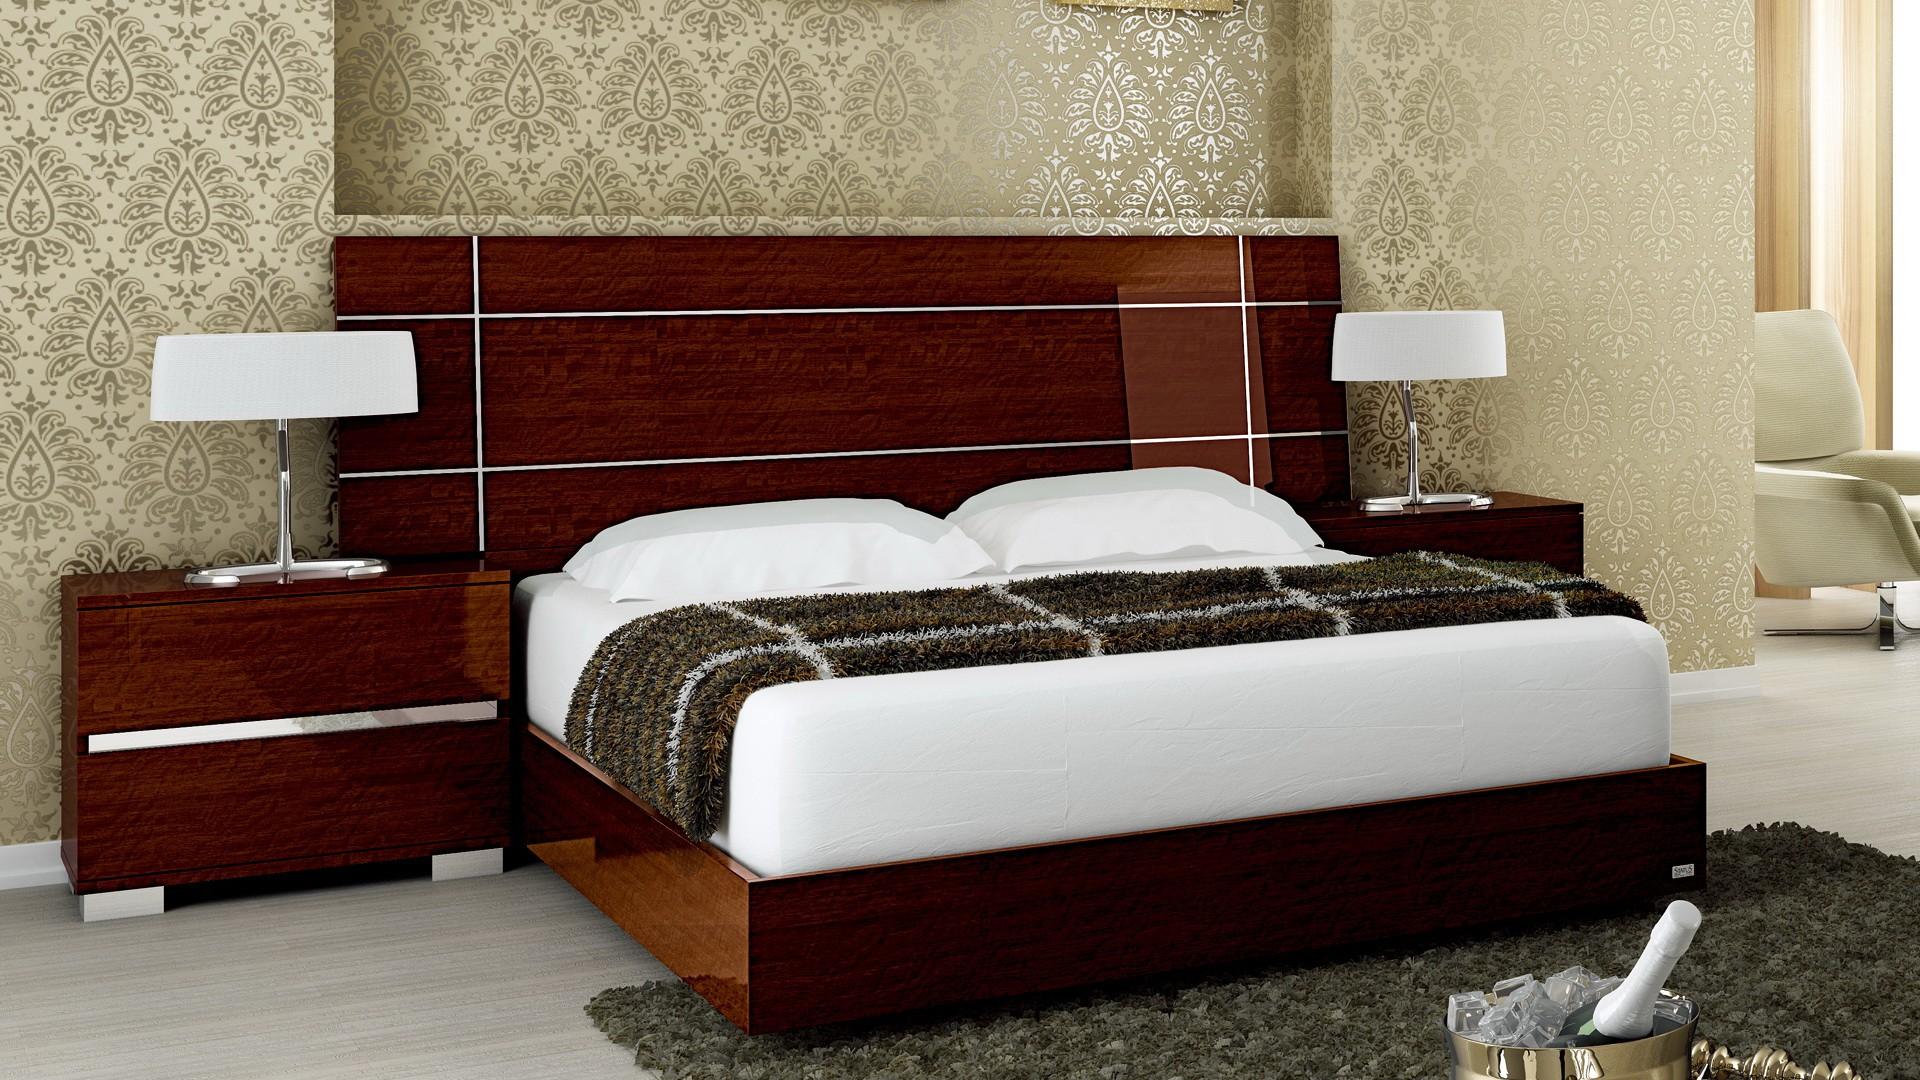 

    
At Home USA Dream Walnut High Gloss Lacquer Queen Bed Contemporary Made in Italy
